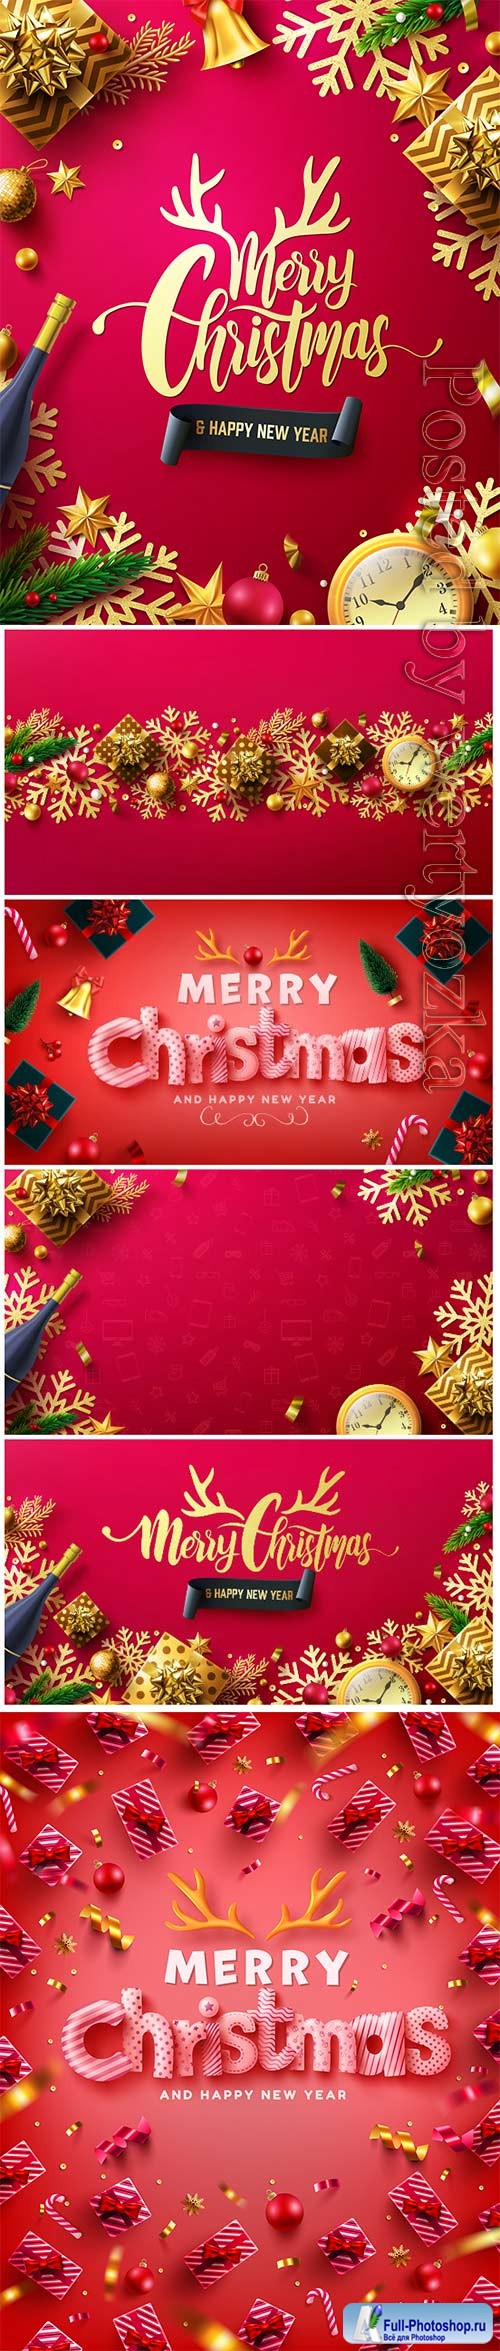 Vector of merry christmas & happy new year promotion poster or banner 